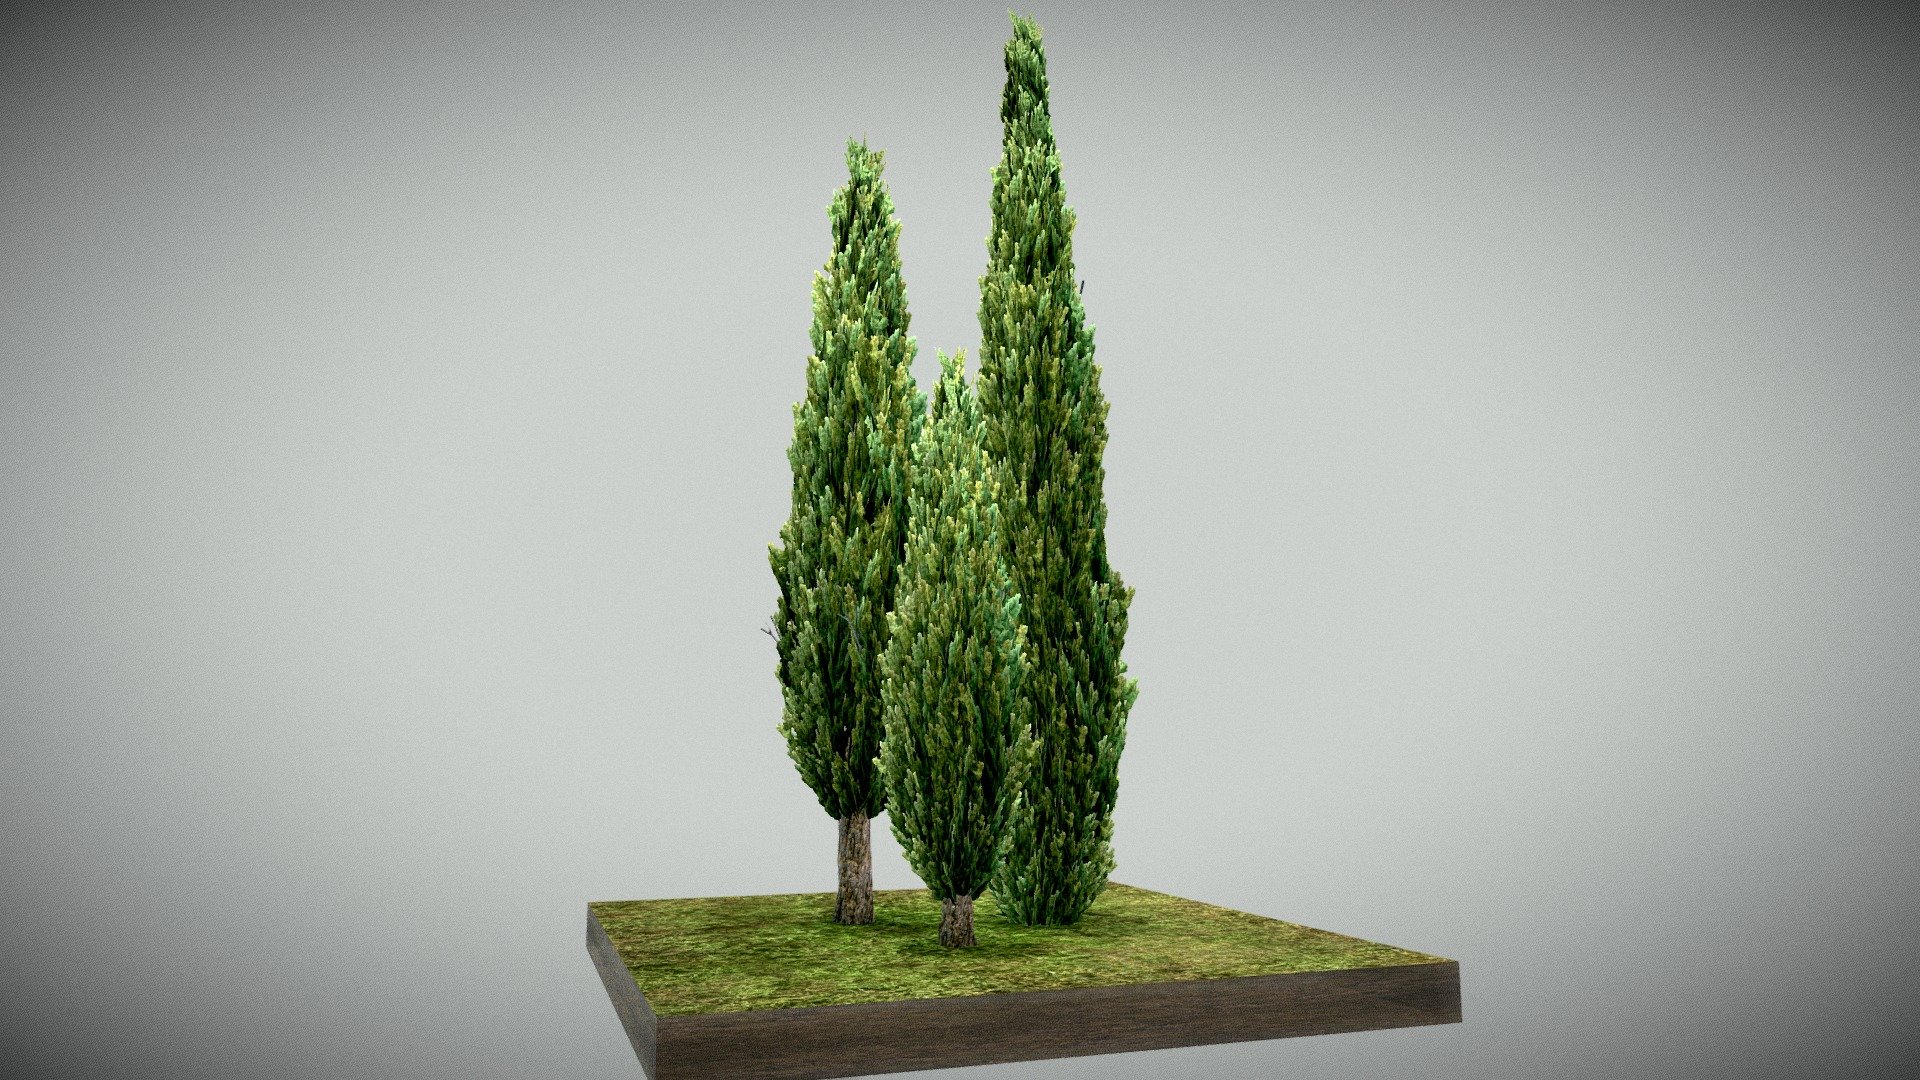 Mediterranean Cypress - Cupressus sempervirens

Low-poly trees for games. 

The Mediterranean cypress, also known as Italian cypress, Tuscan cypress, Persian cypress, or pencil pine, is a species of cypress native to the eastern Mediterranean region 3d model